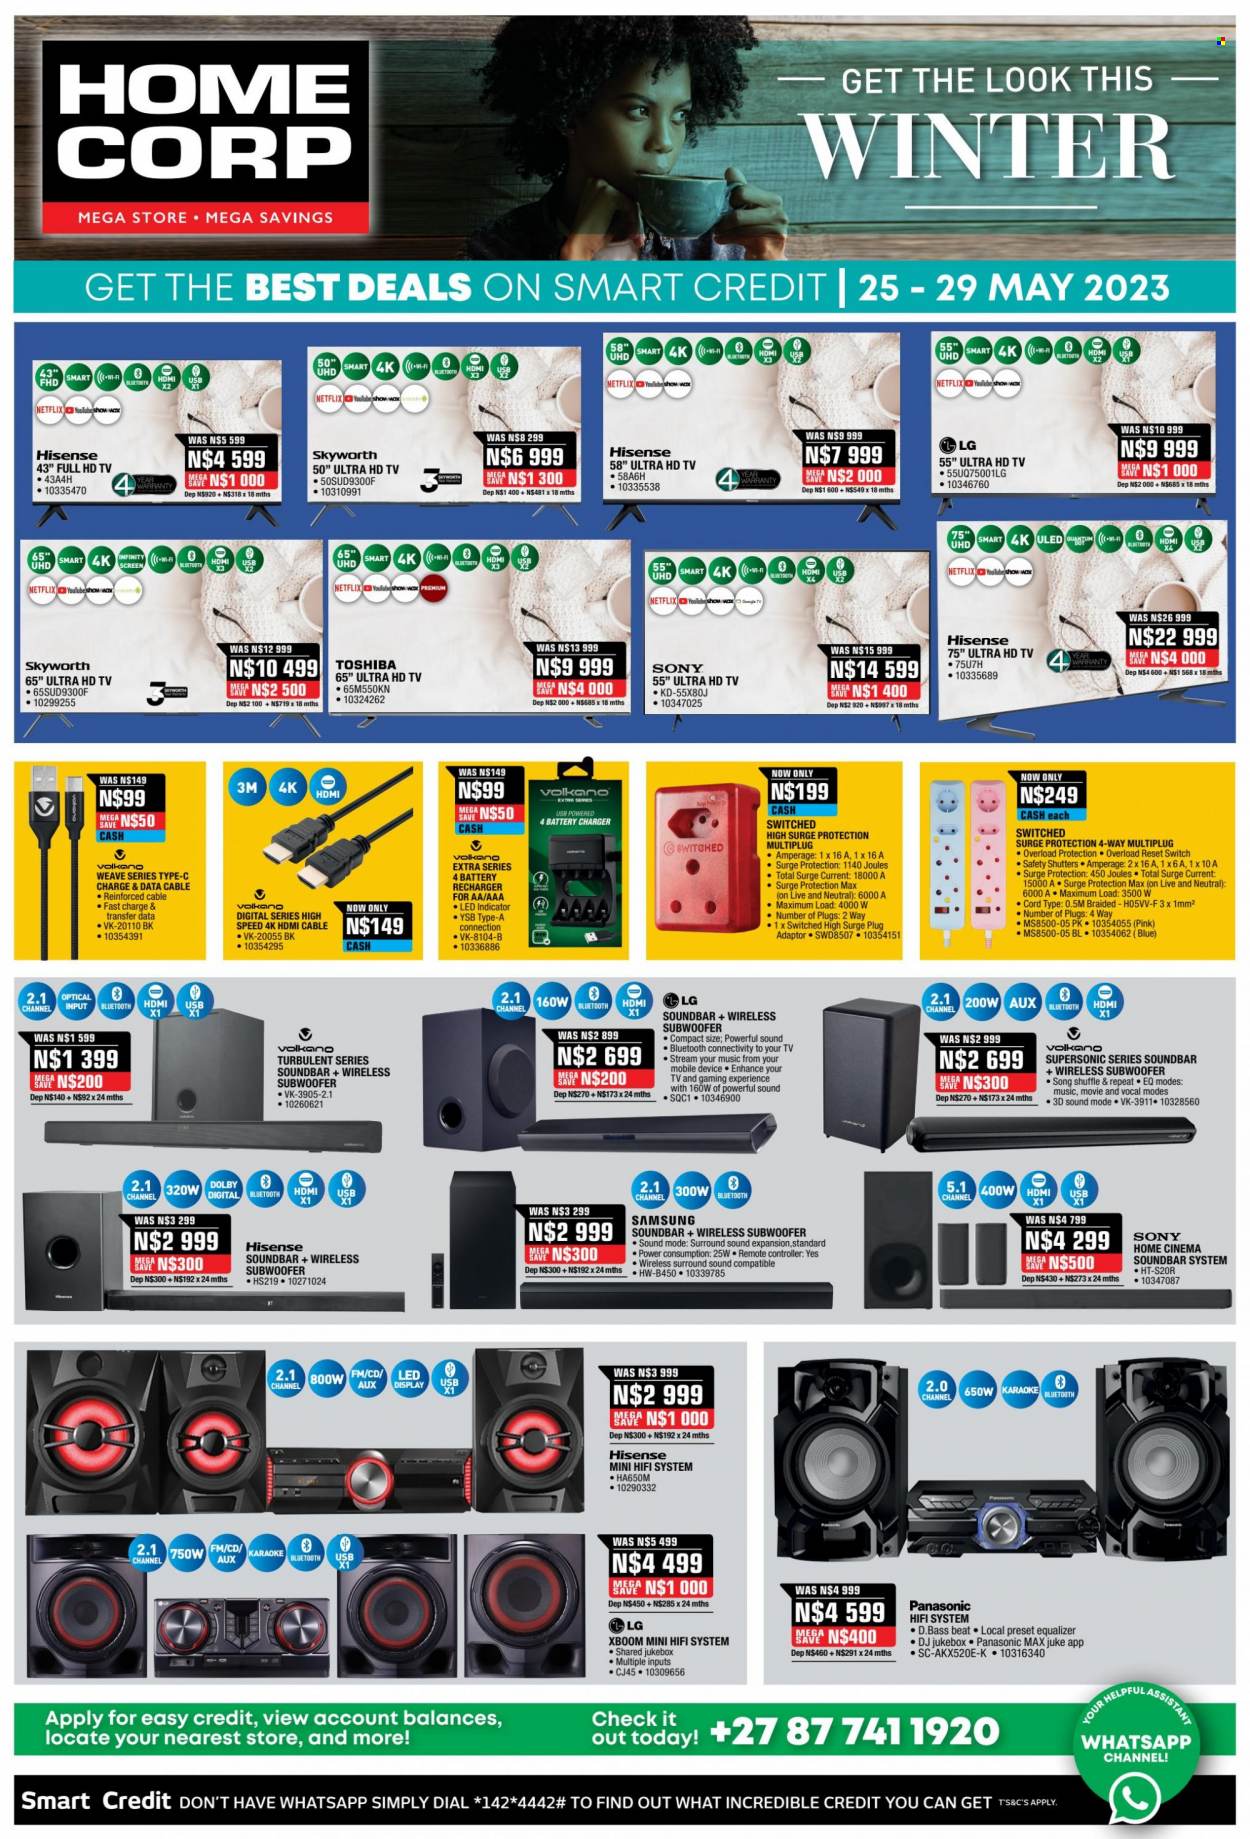 thumbnail - HomeCorp catalogue  - 25/05/2023 - 29/05/2023 - Sales products - Samsung, Sony, Toshiba, UHD TV, ultra hd, HDTV, Hisense, Full HD TV, TV, Skyworth, home theater, subwoofer, wireless subwoofer, sound bar, soundbar system, Volkano, HDMI cable, battery charger. Page 5.